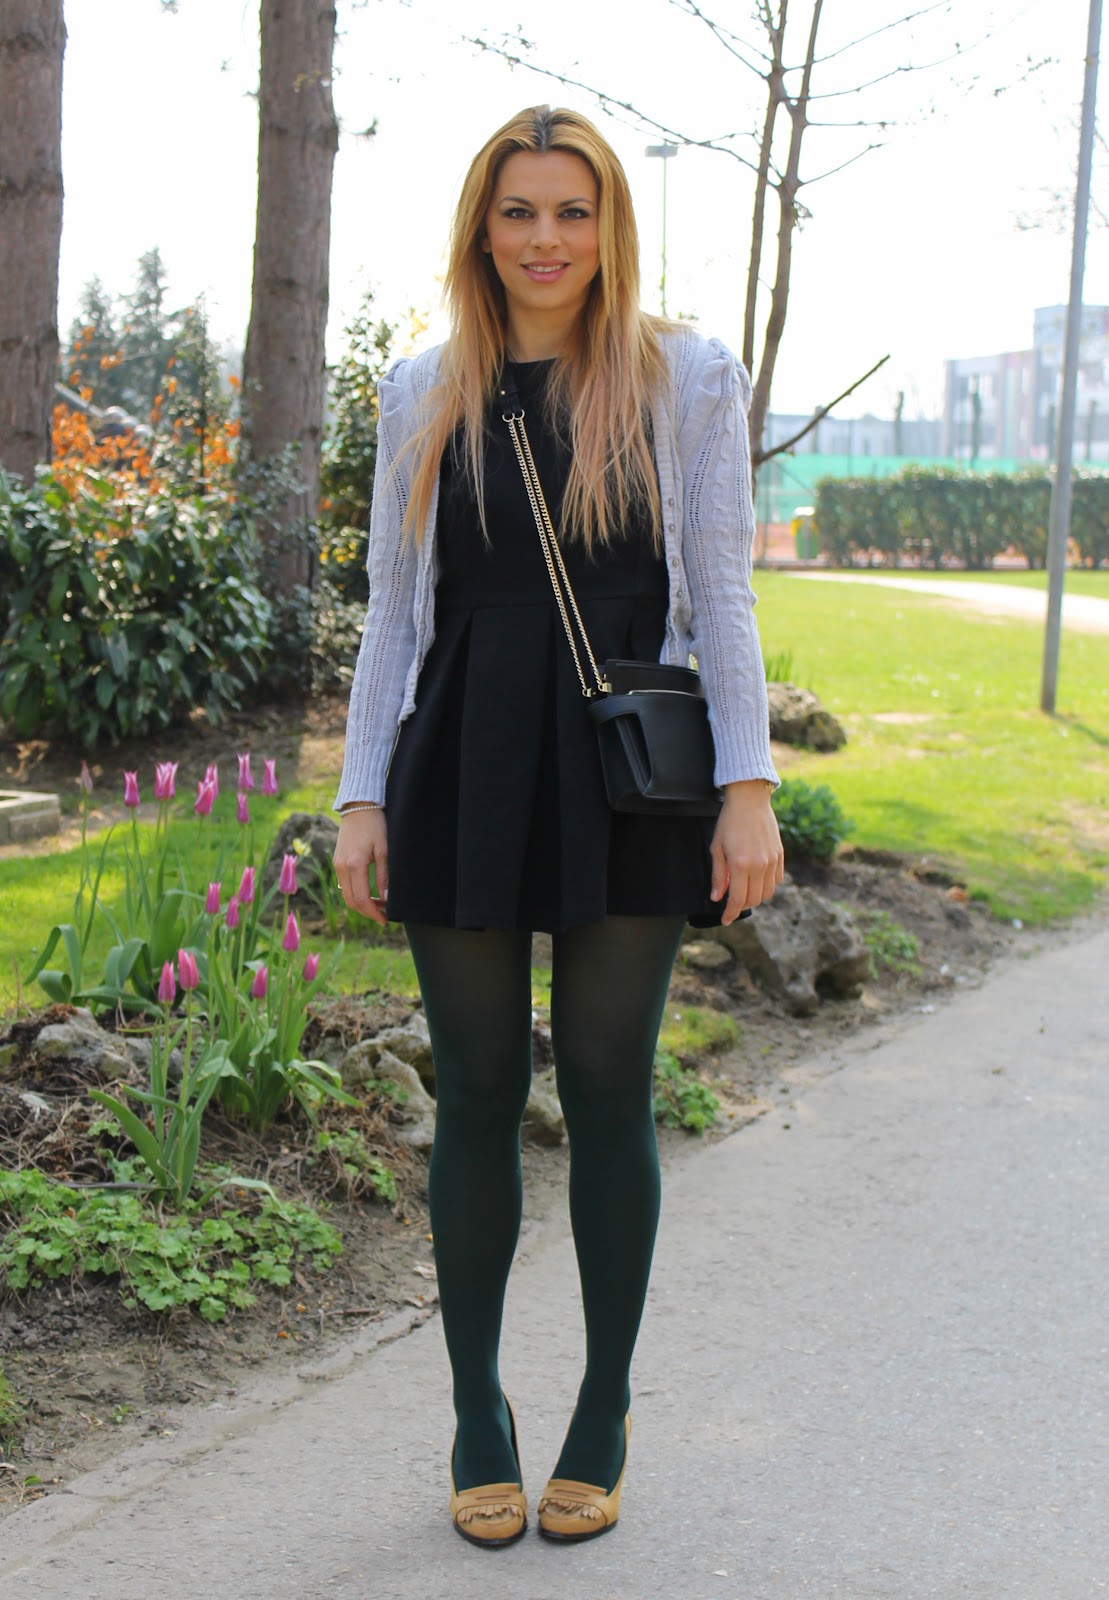 Green tights i-am-a-fashionista.blogspot.co.uk - Fashionmylegs : The tights  and hosiery blog